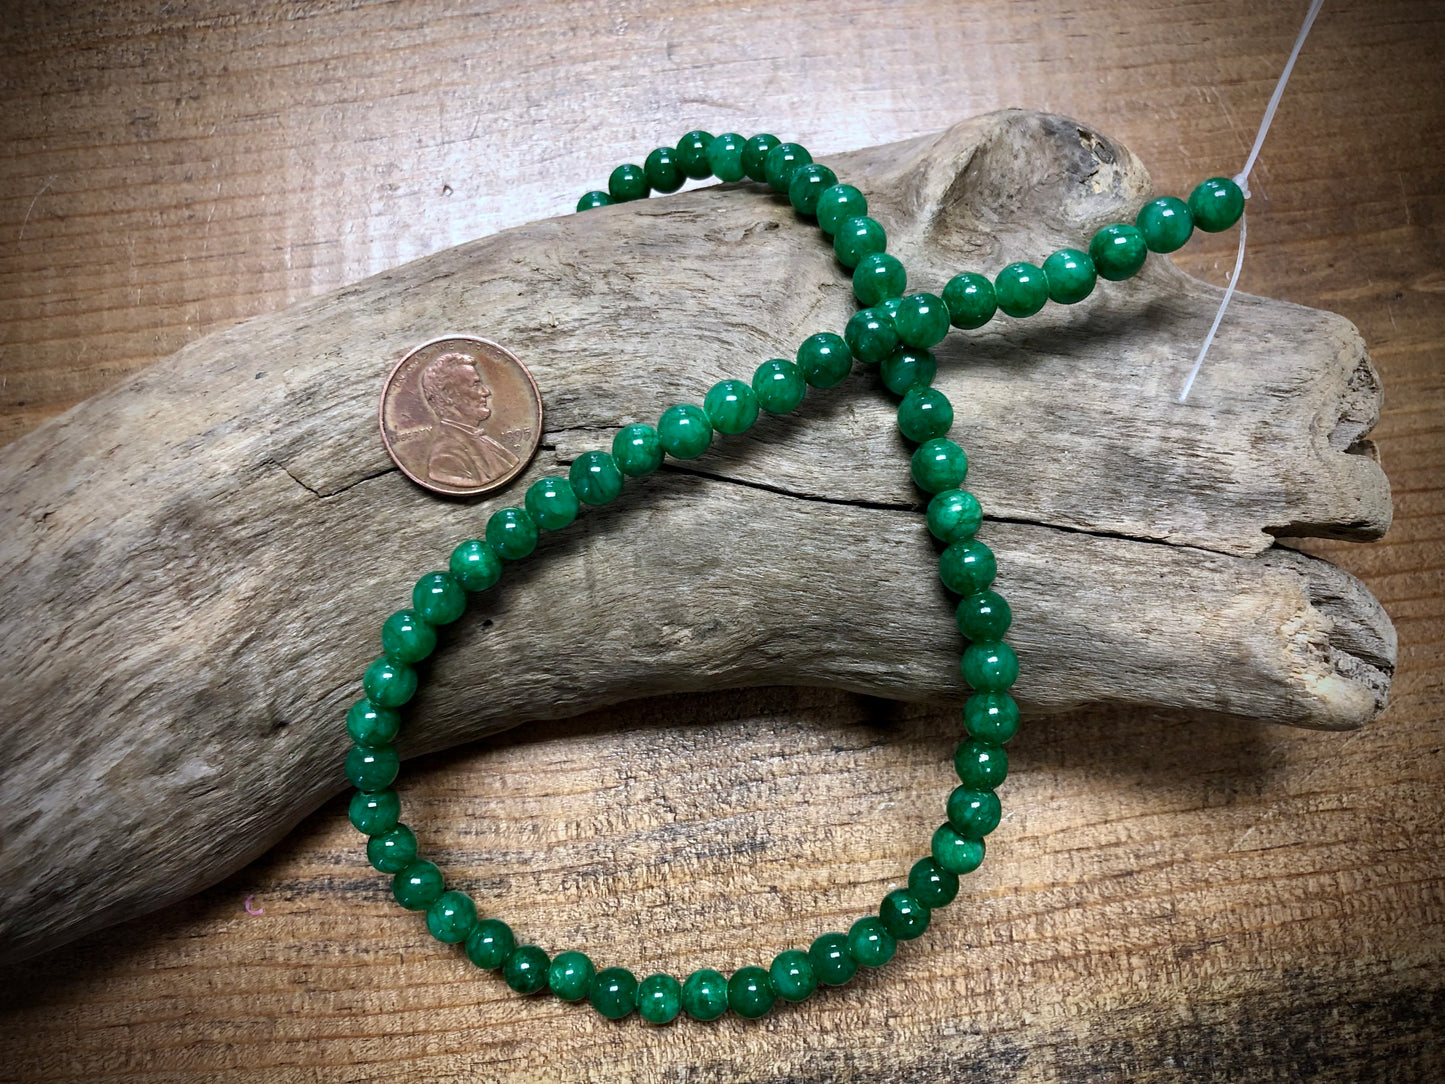 Dyed Jade Smooth Rounds - Green - 6mm - 15.5"